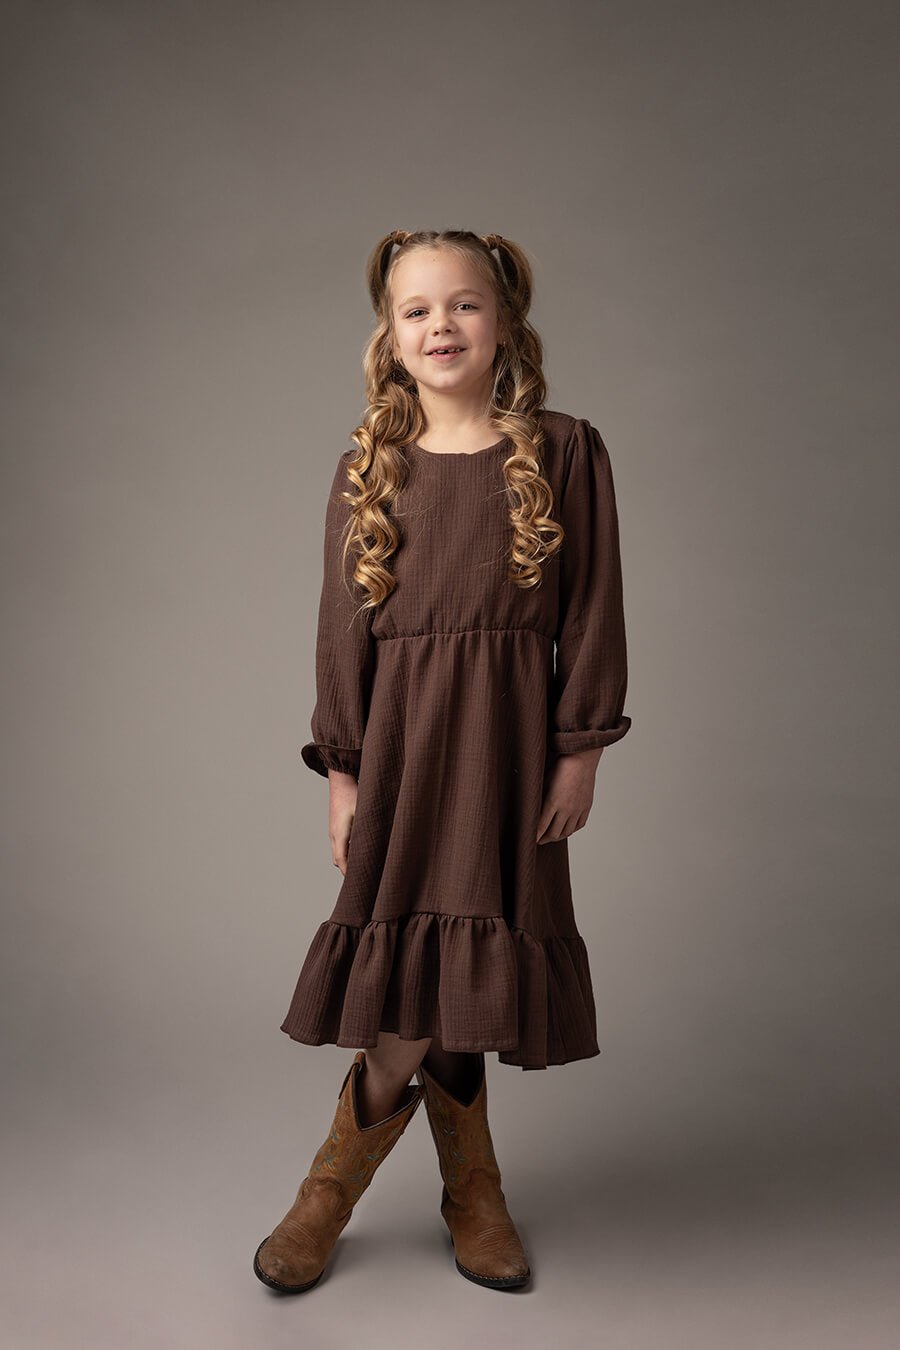 blond girl poses in a studio wearing a mid long chocolate dress in boho style. the dress has long sleeves and ruffle details. she has boots to match the western chic style.